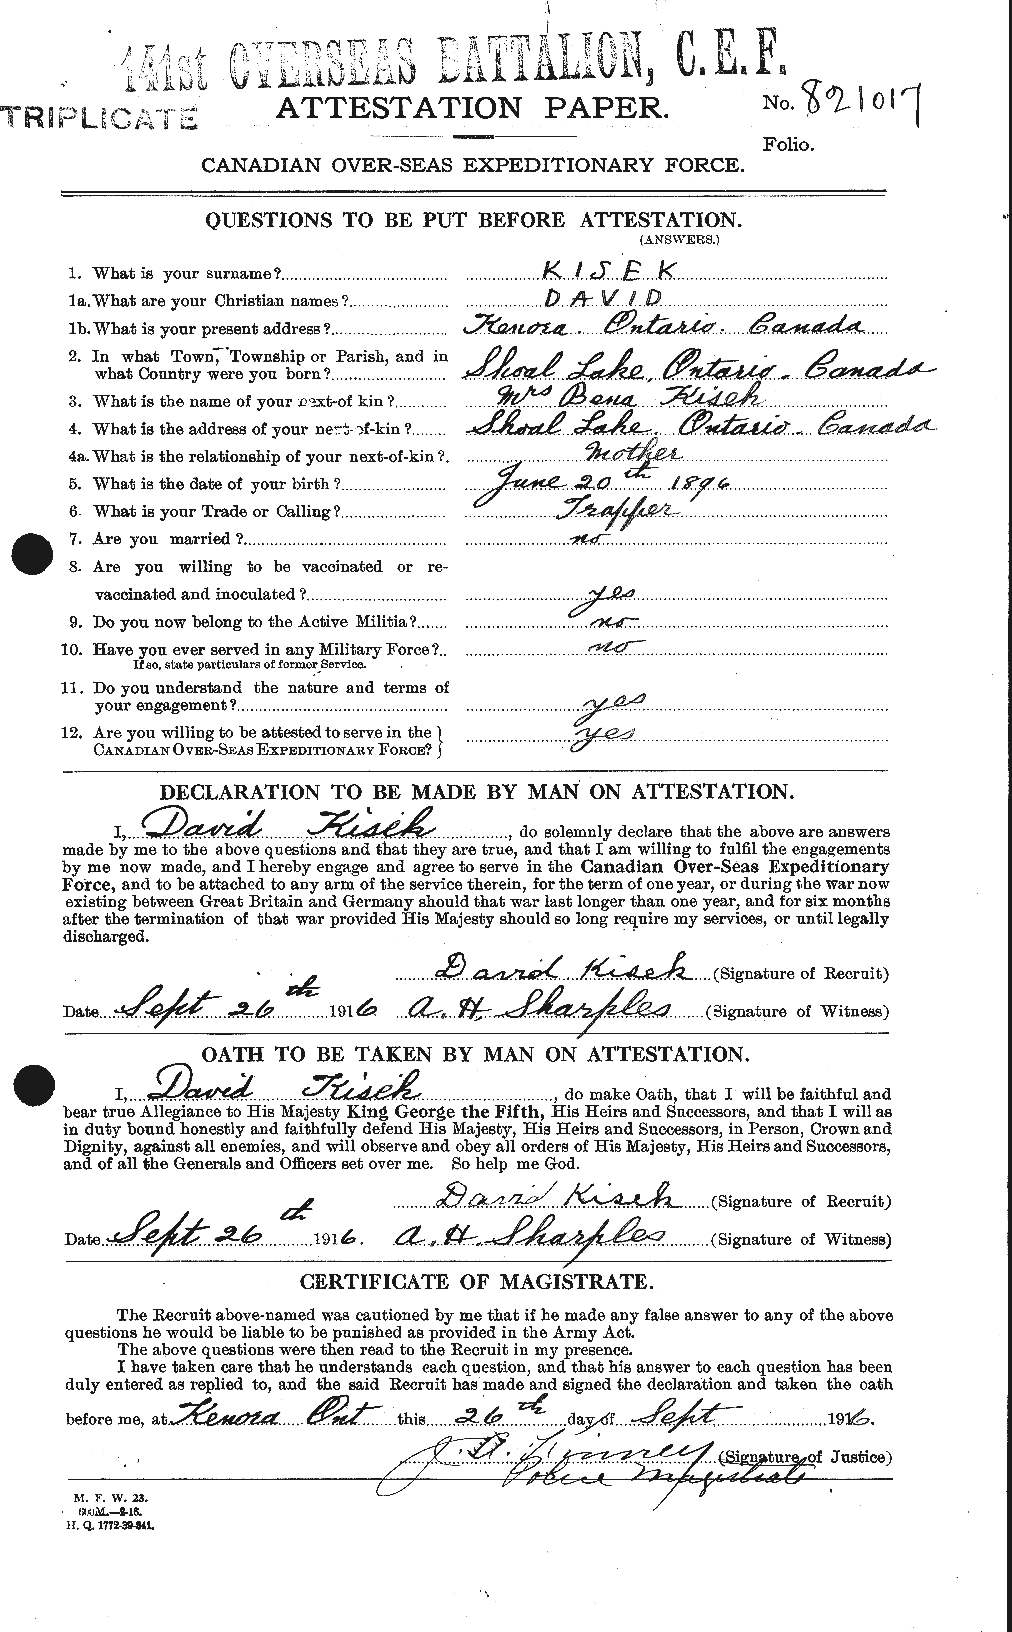 Personnel Records of the First World War - CEF 436319a